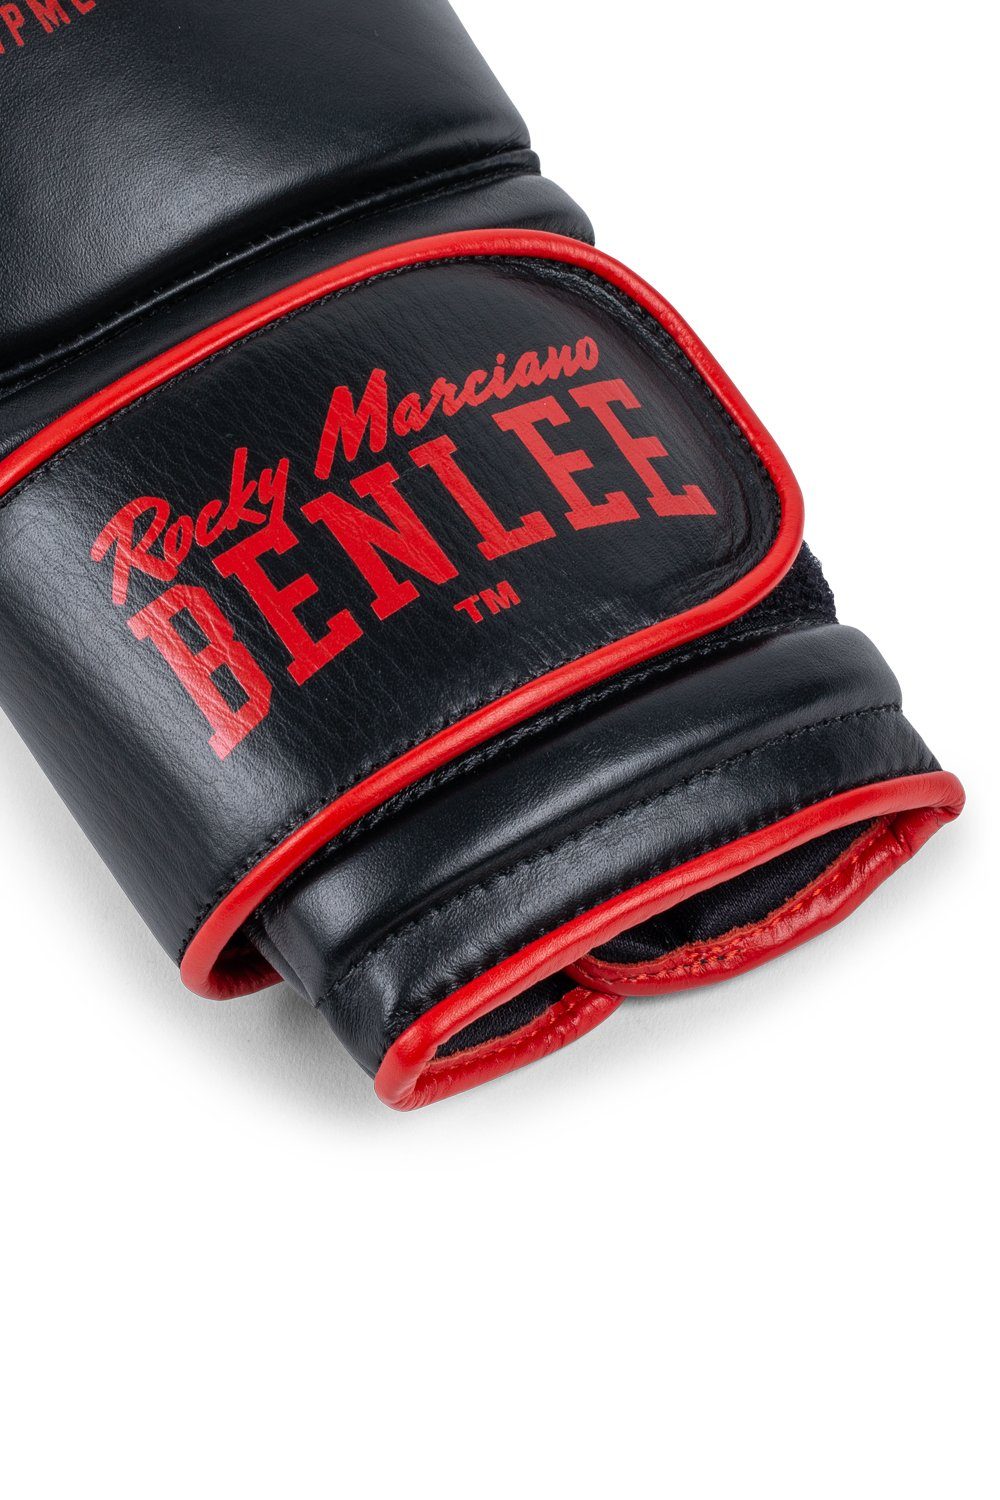 Rocky Marciano SPAR Benlee Boxhandschuhe TOXEY